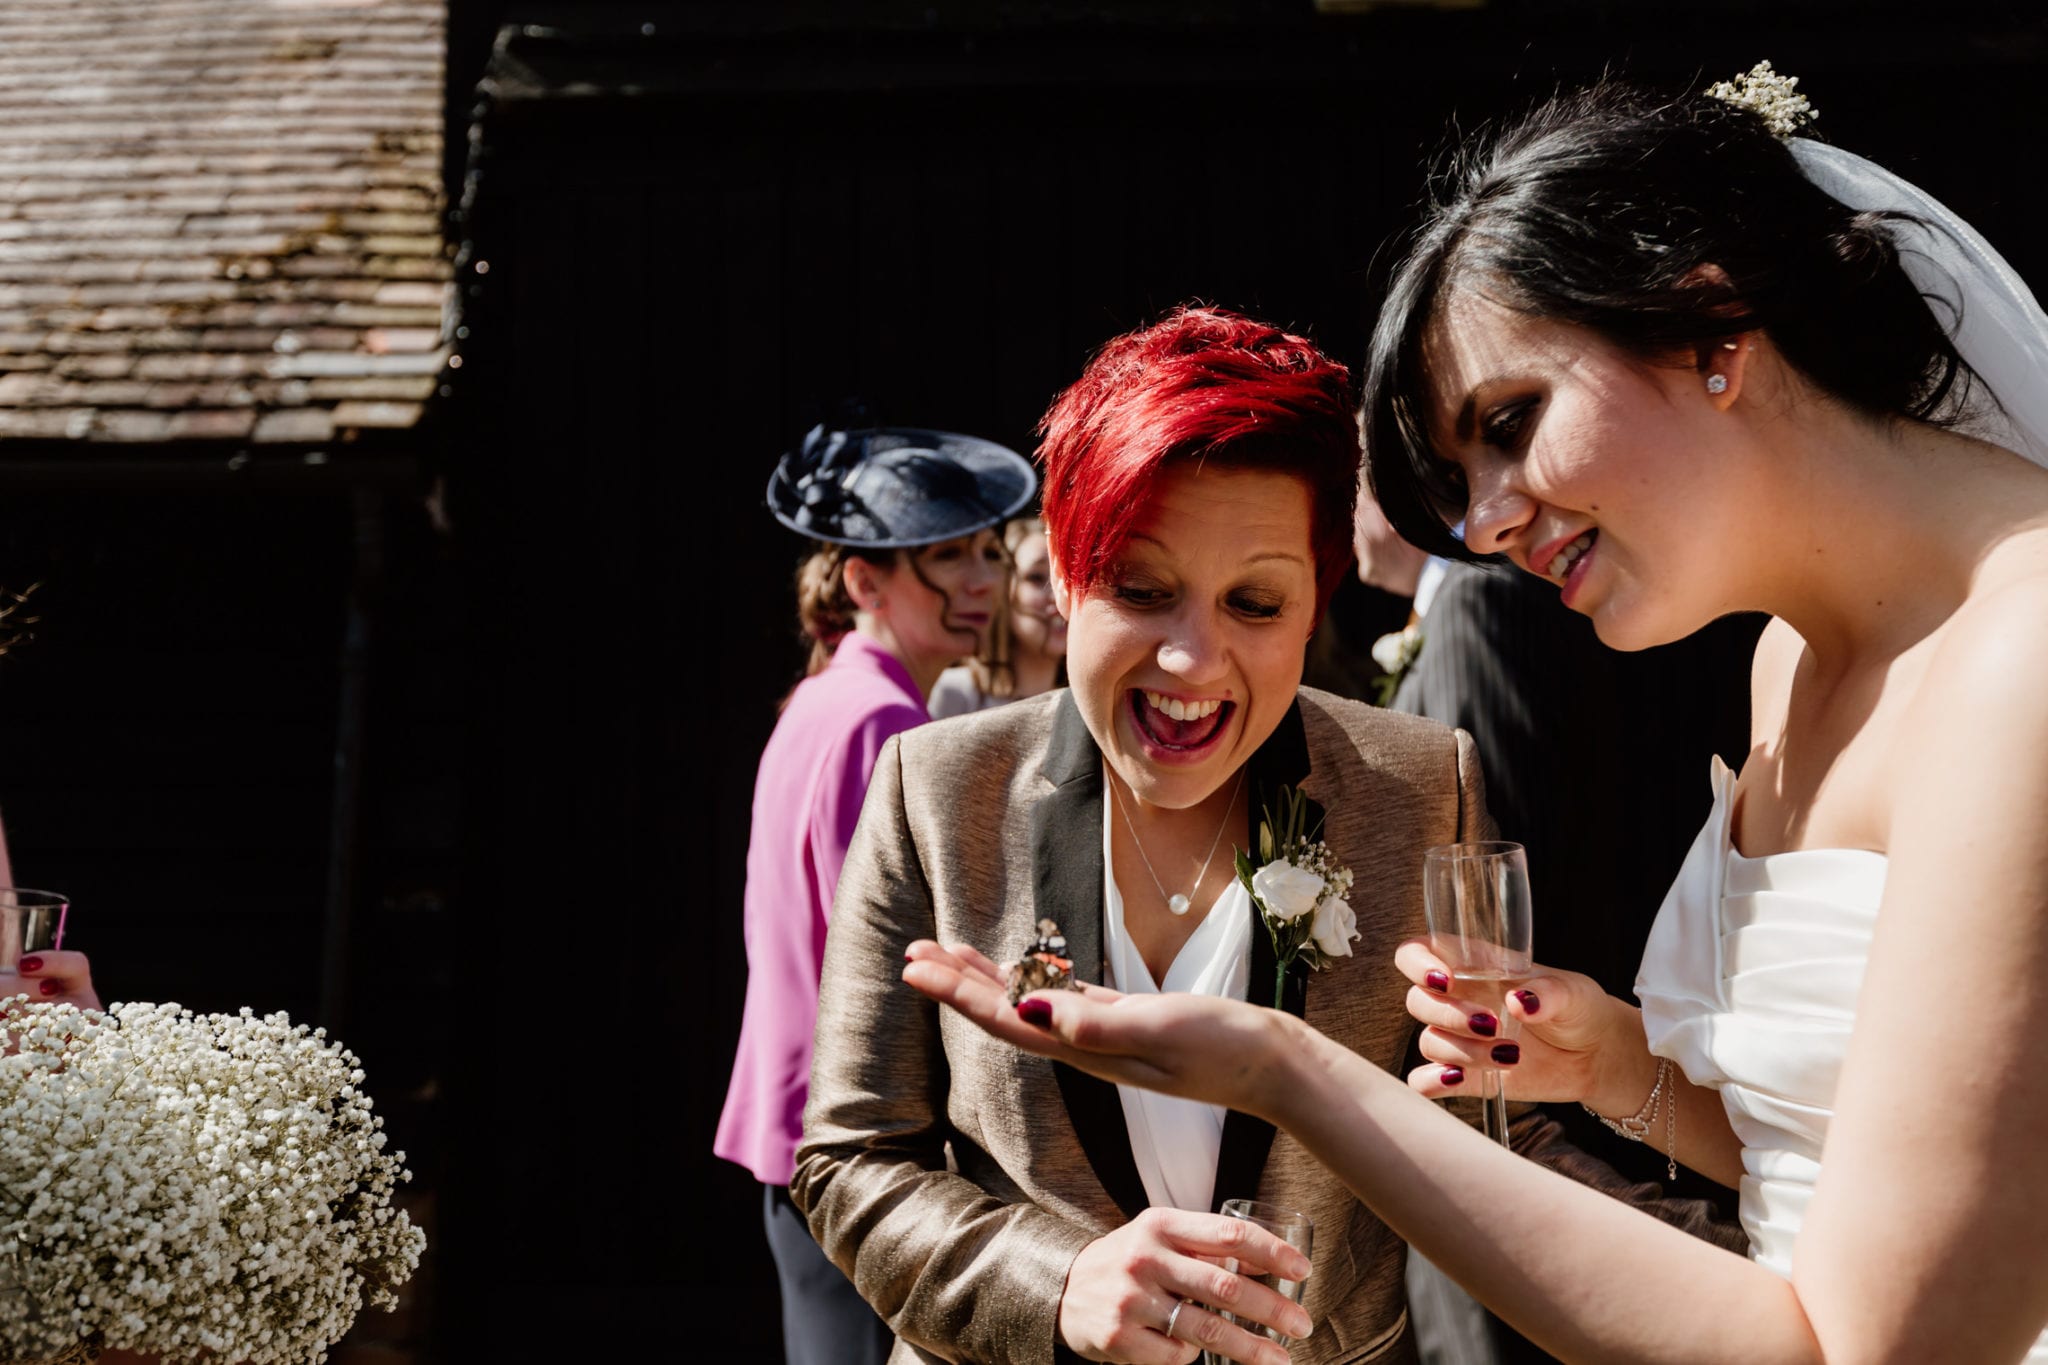 Two brides share a moment with a butterfly at wedding